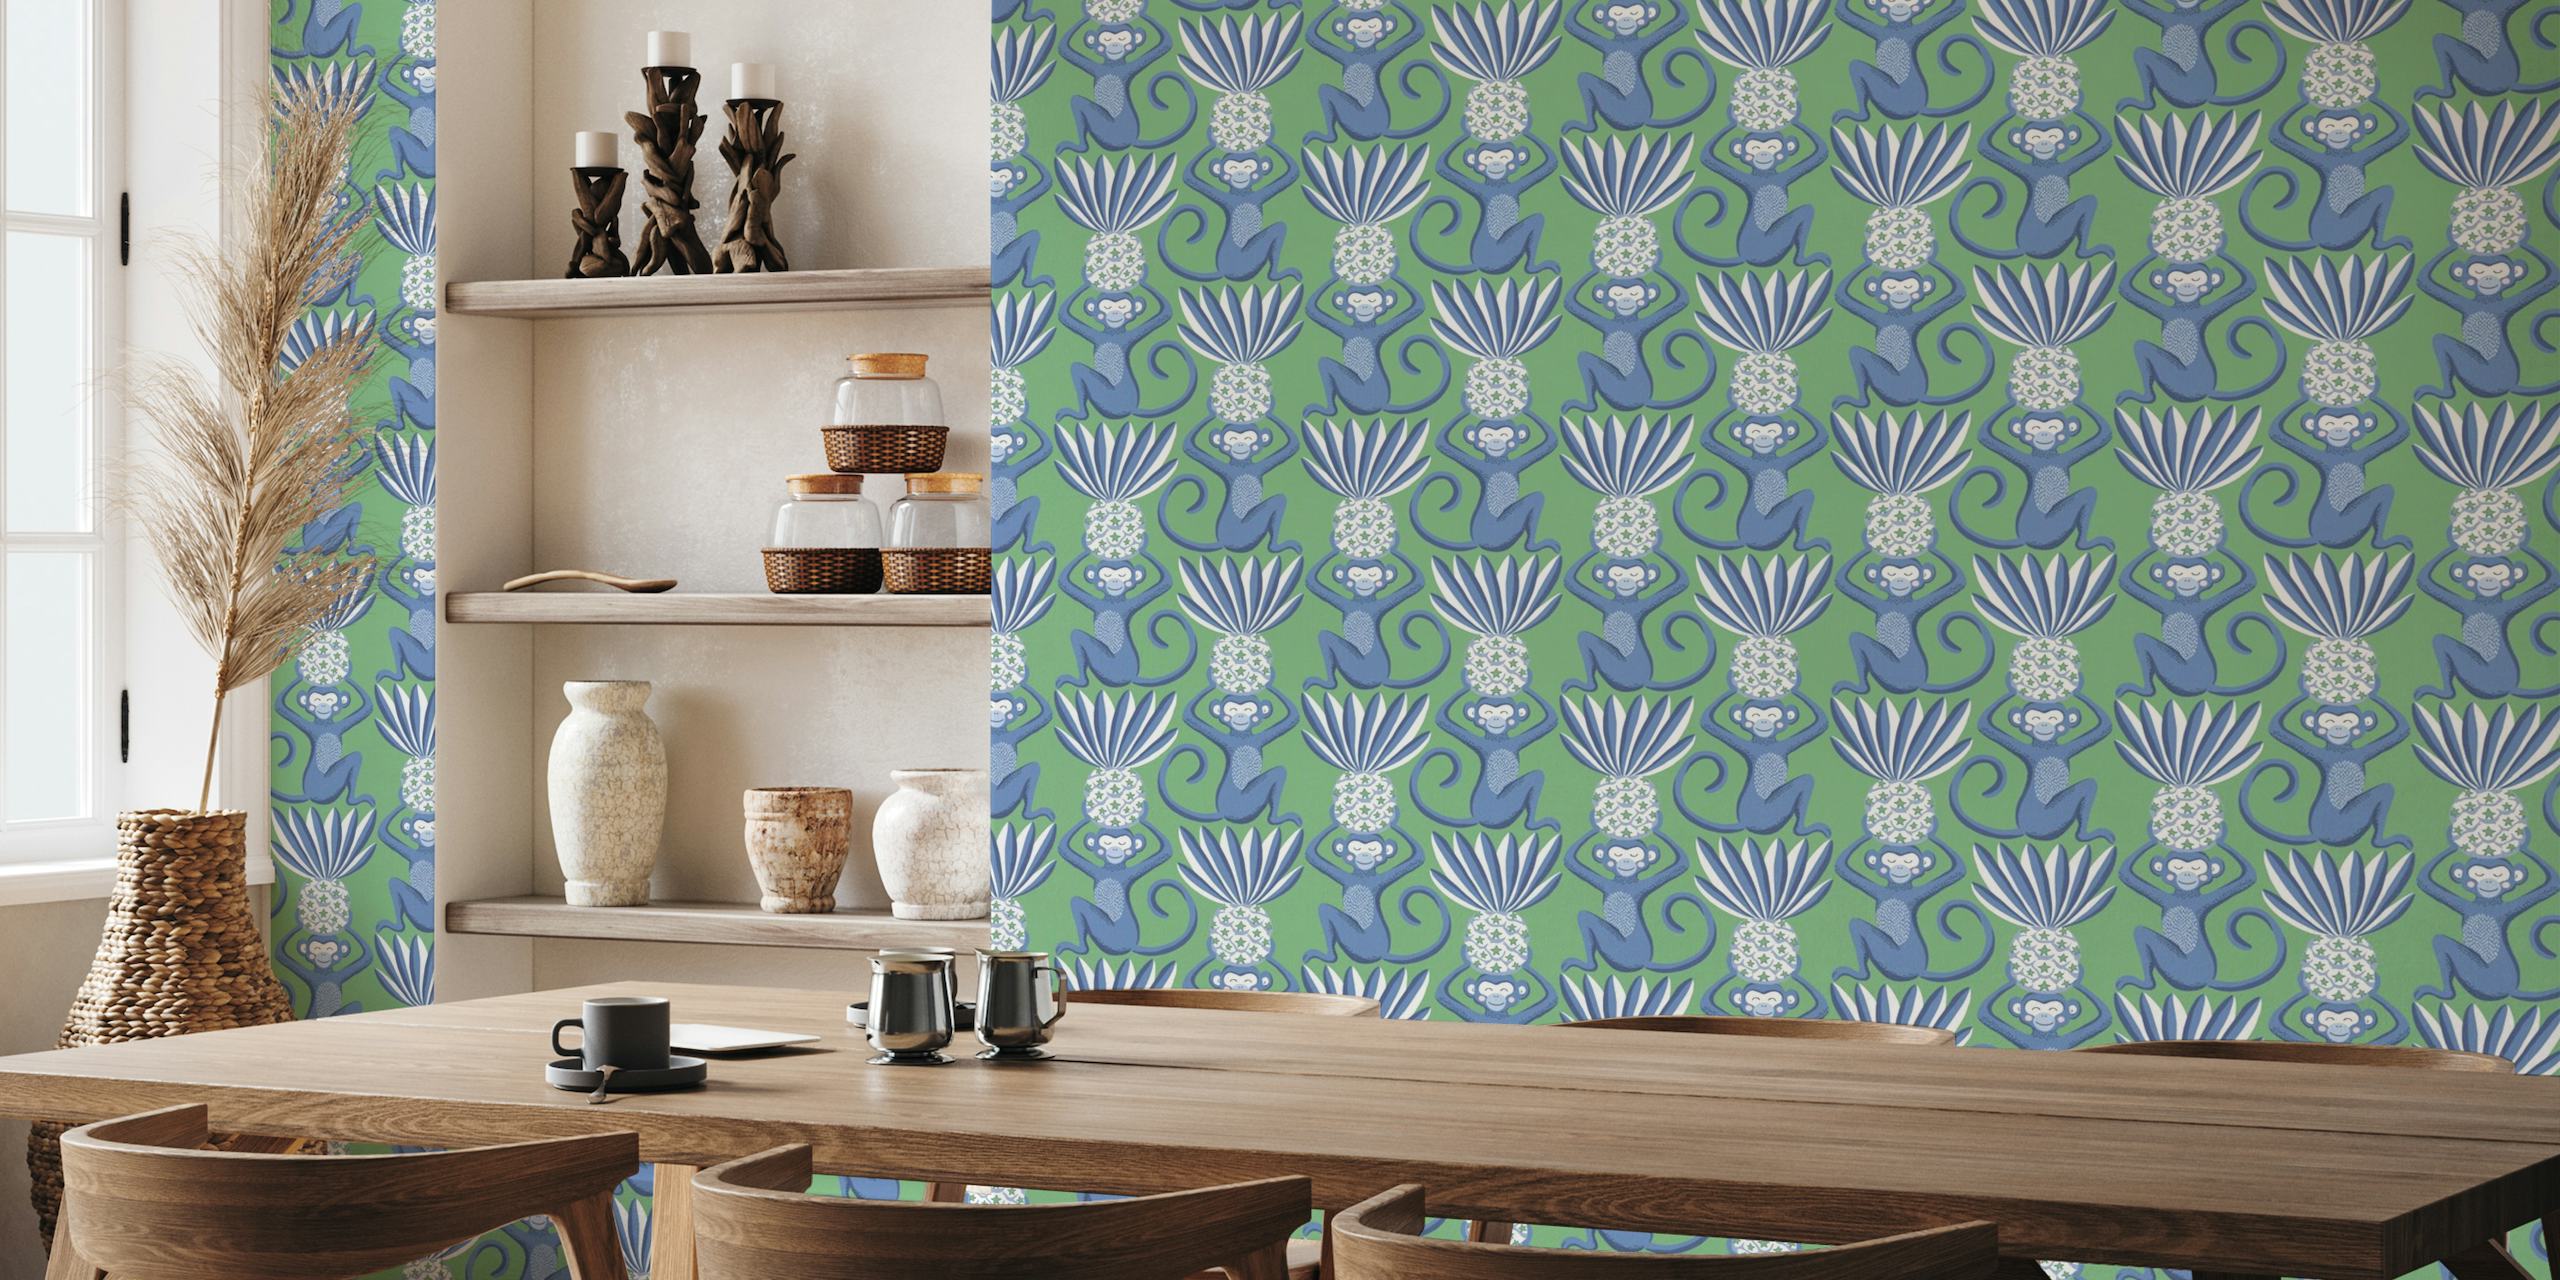 Monkeys and pineapples - blue and green papel pintado